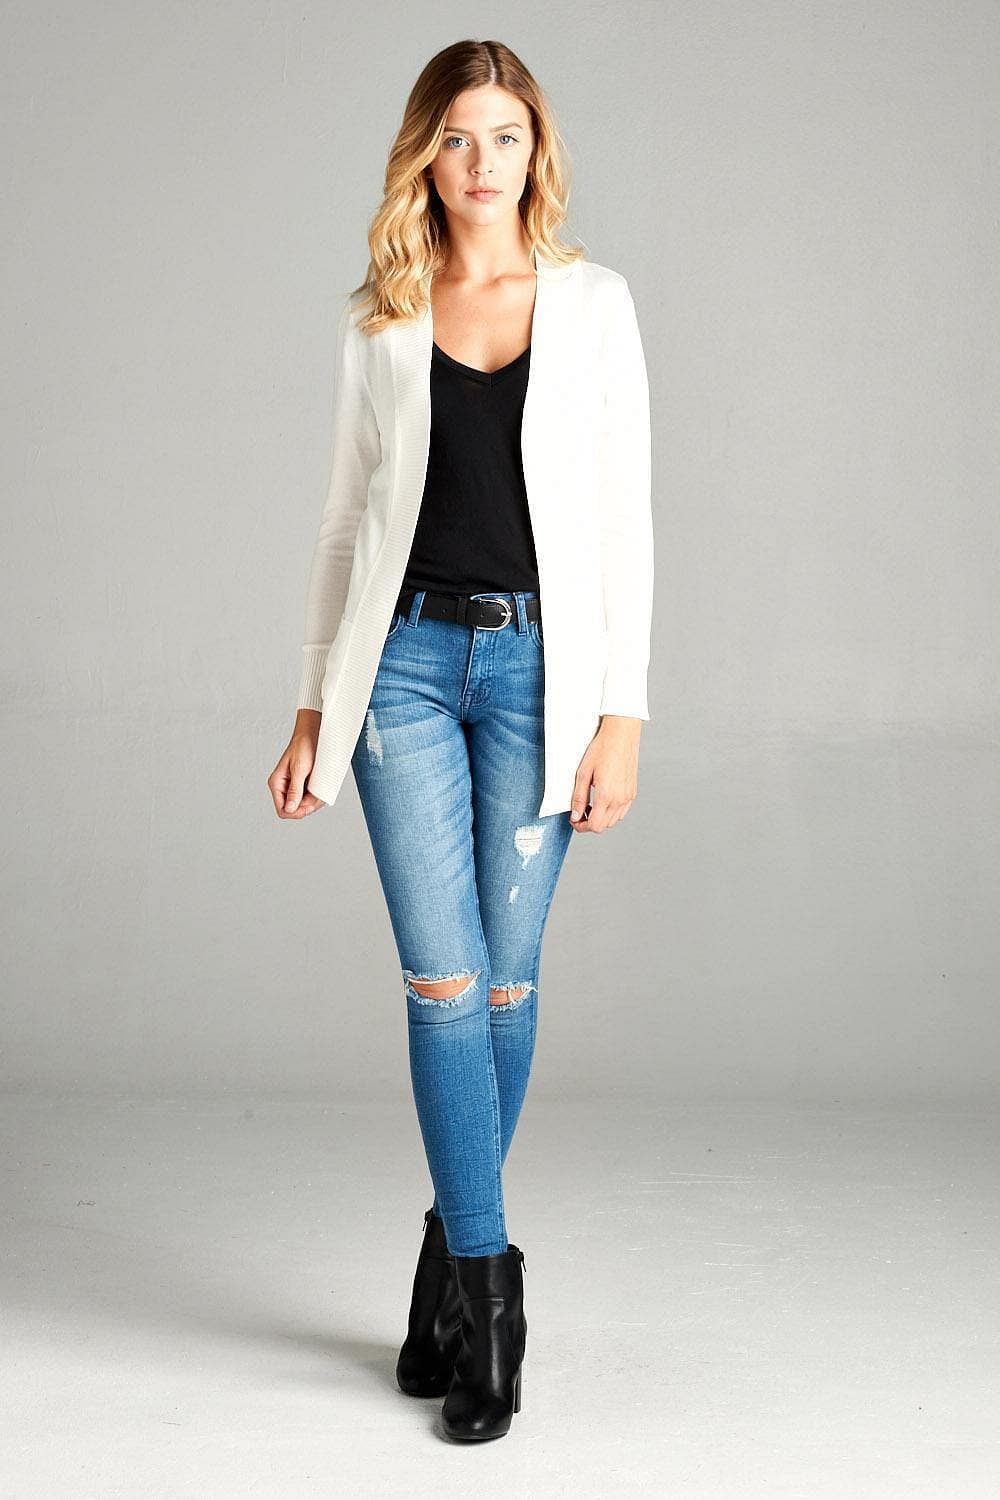 White Long Sleeve Open Front Rib knit Cardigan